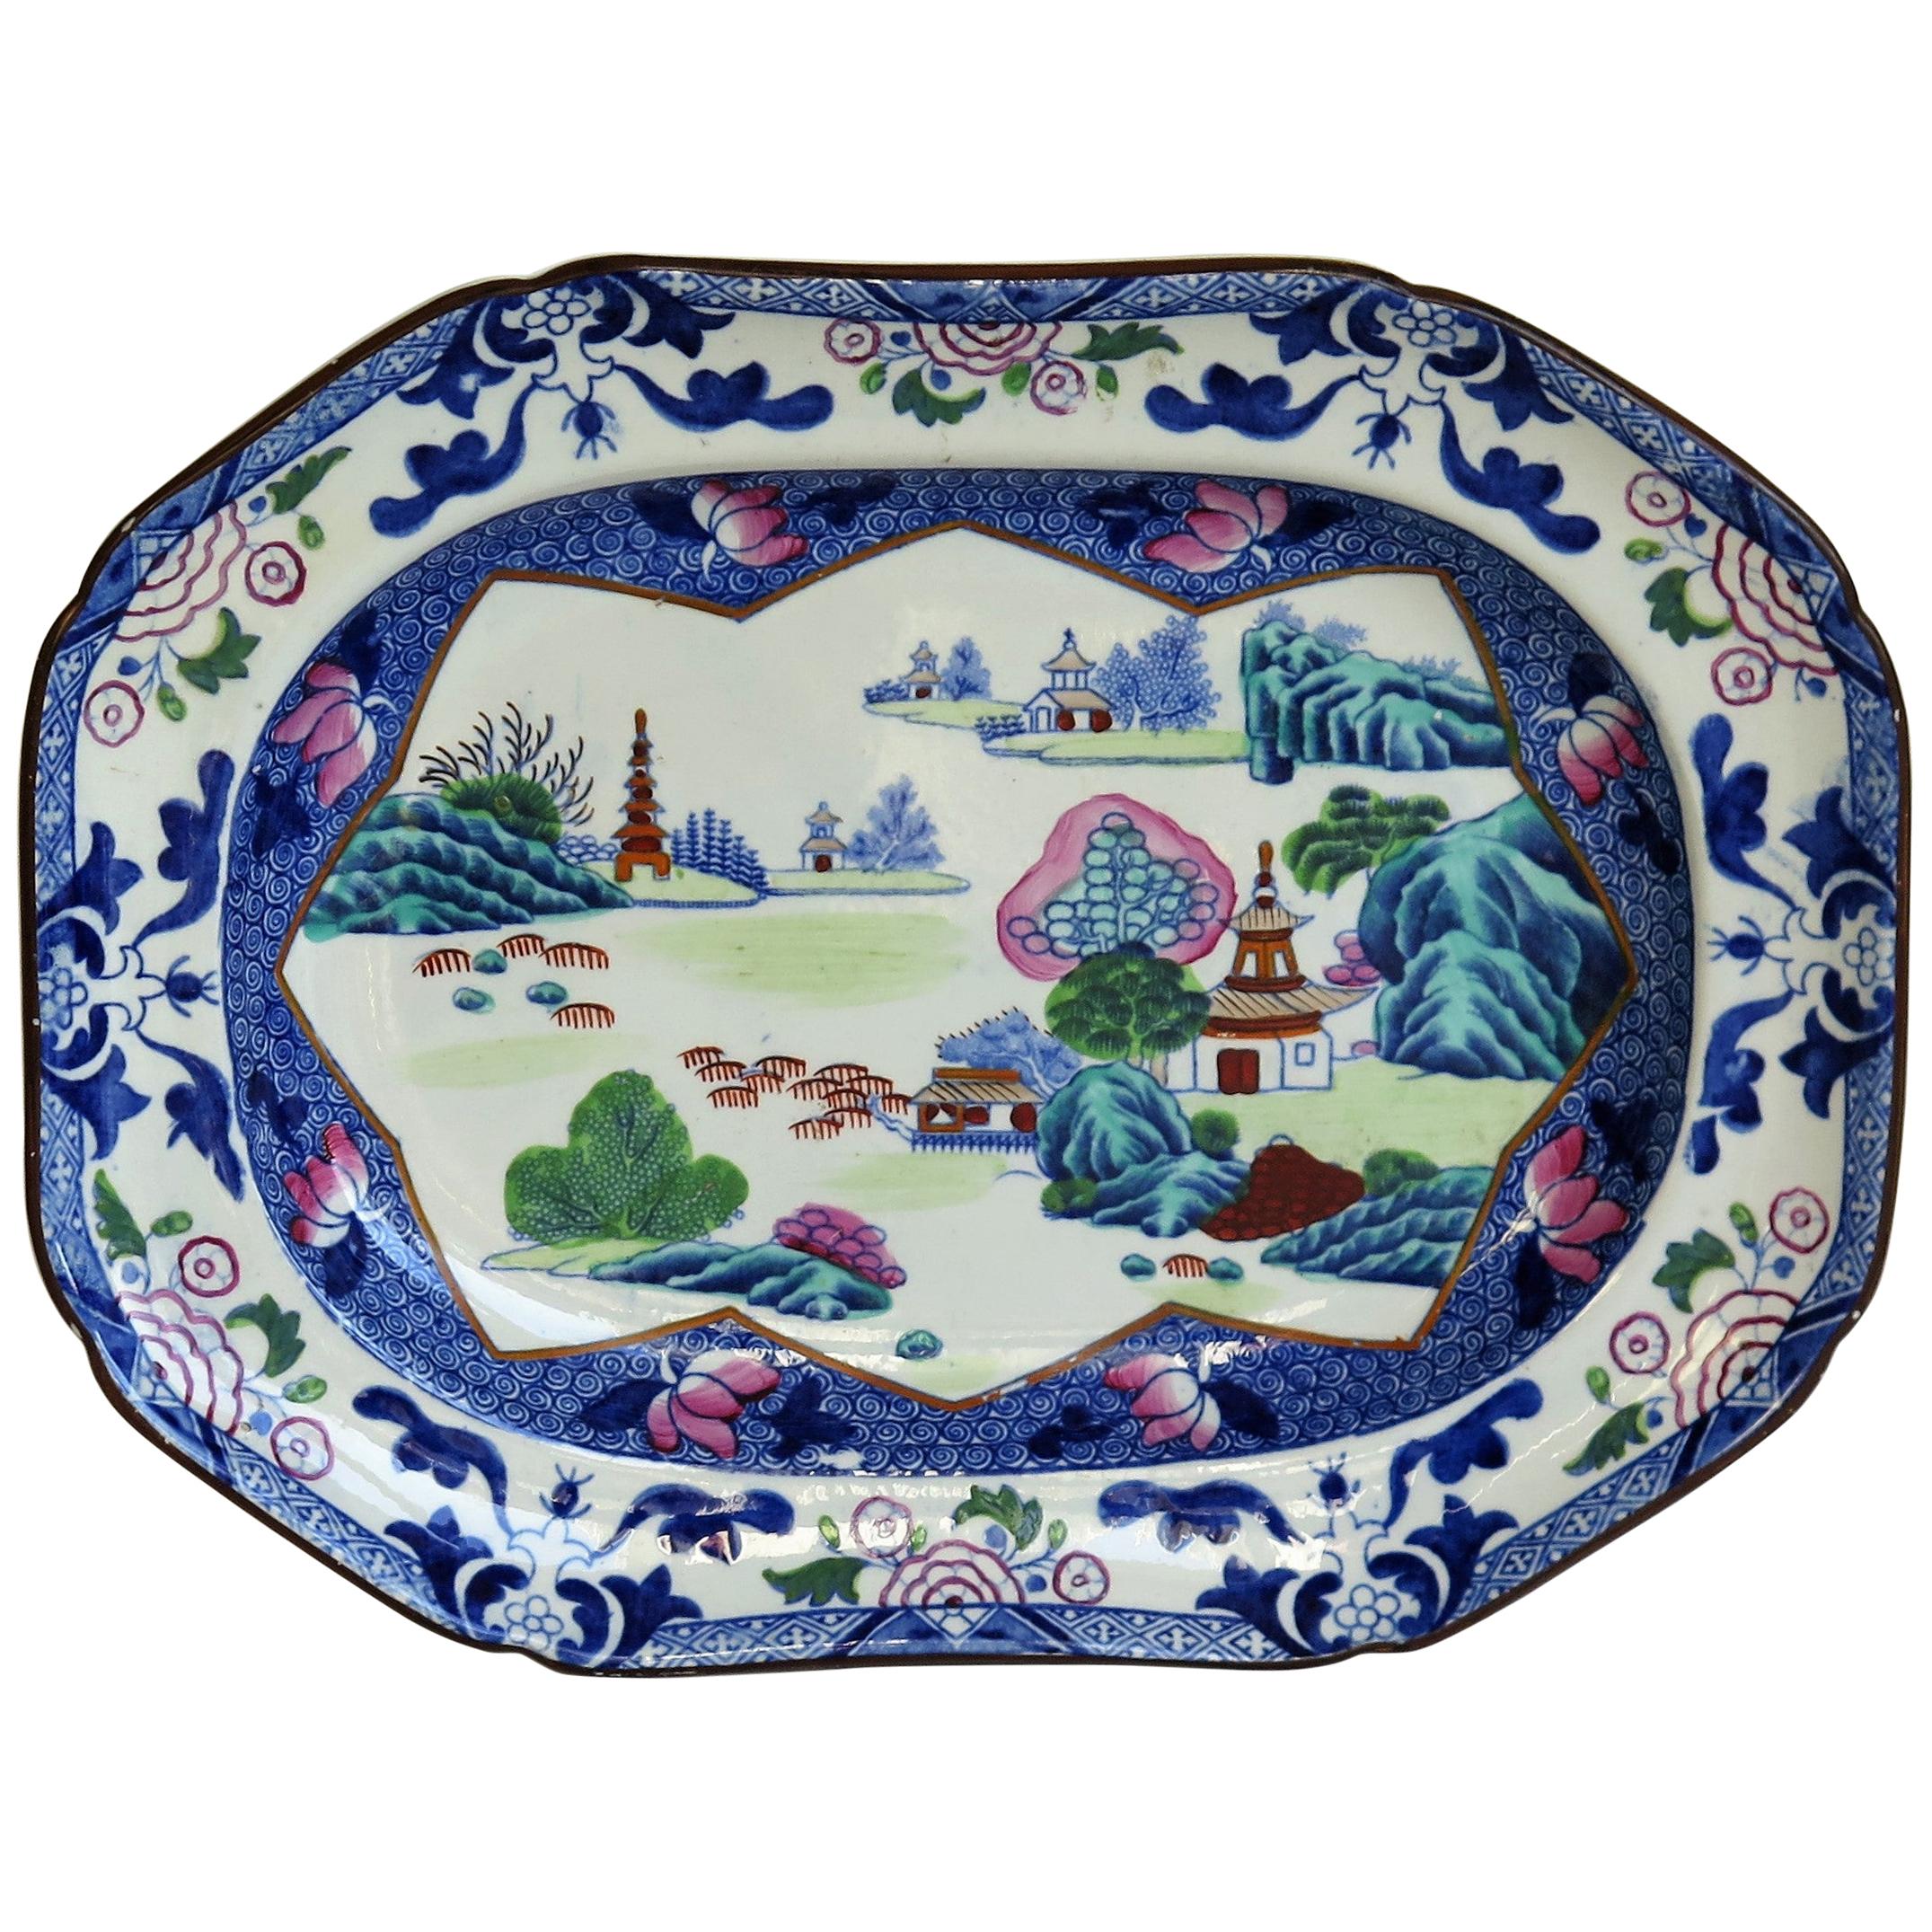 Georgian Ironstone Platter by Hicks & Meigh in Chinese Landscape Ptn, circa 1818